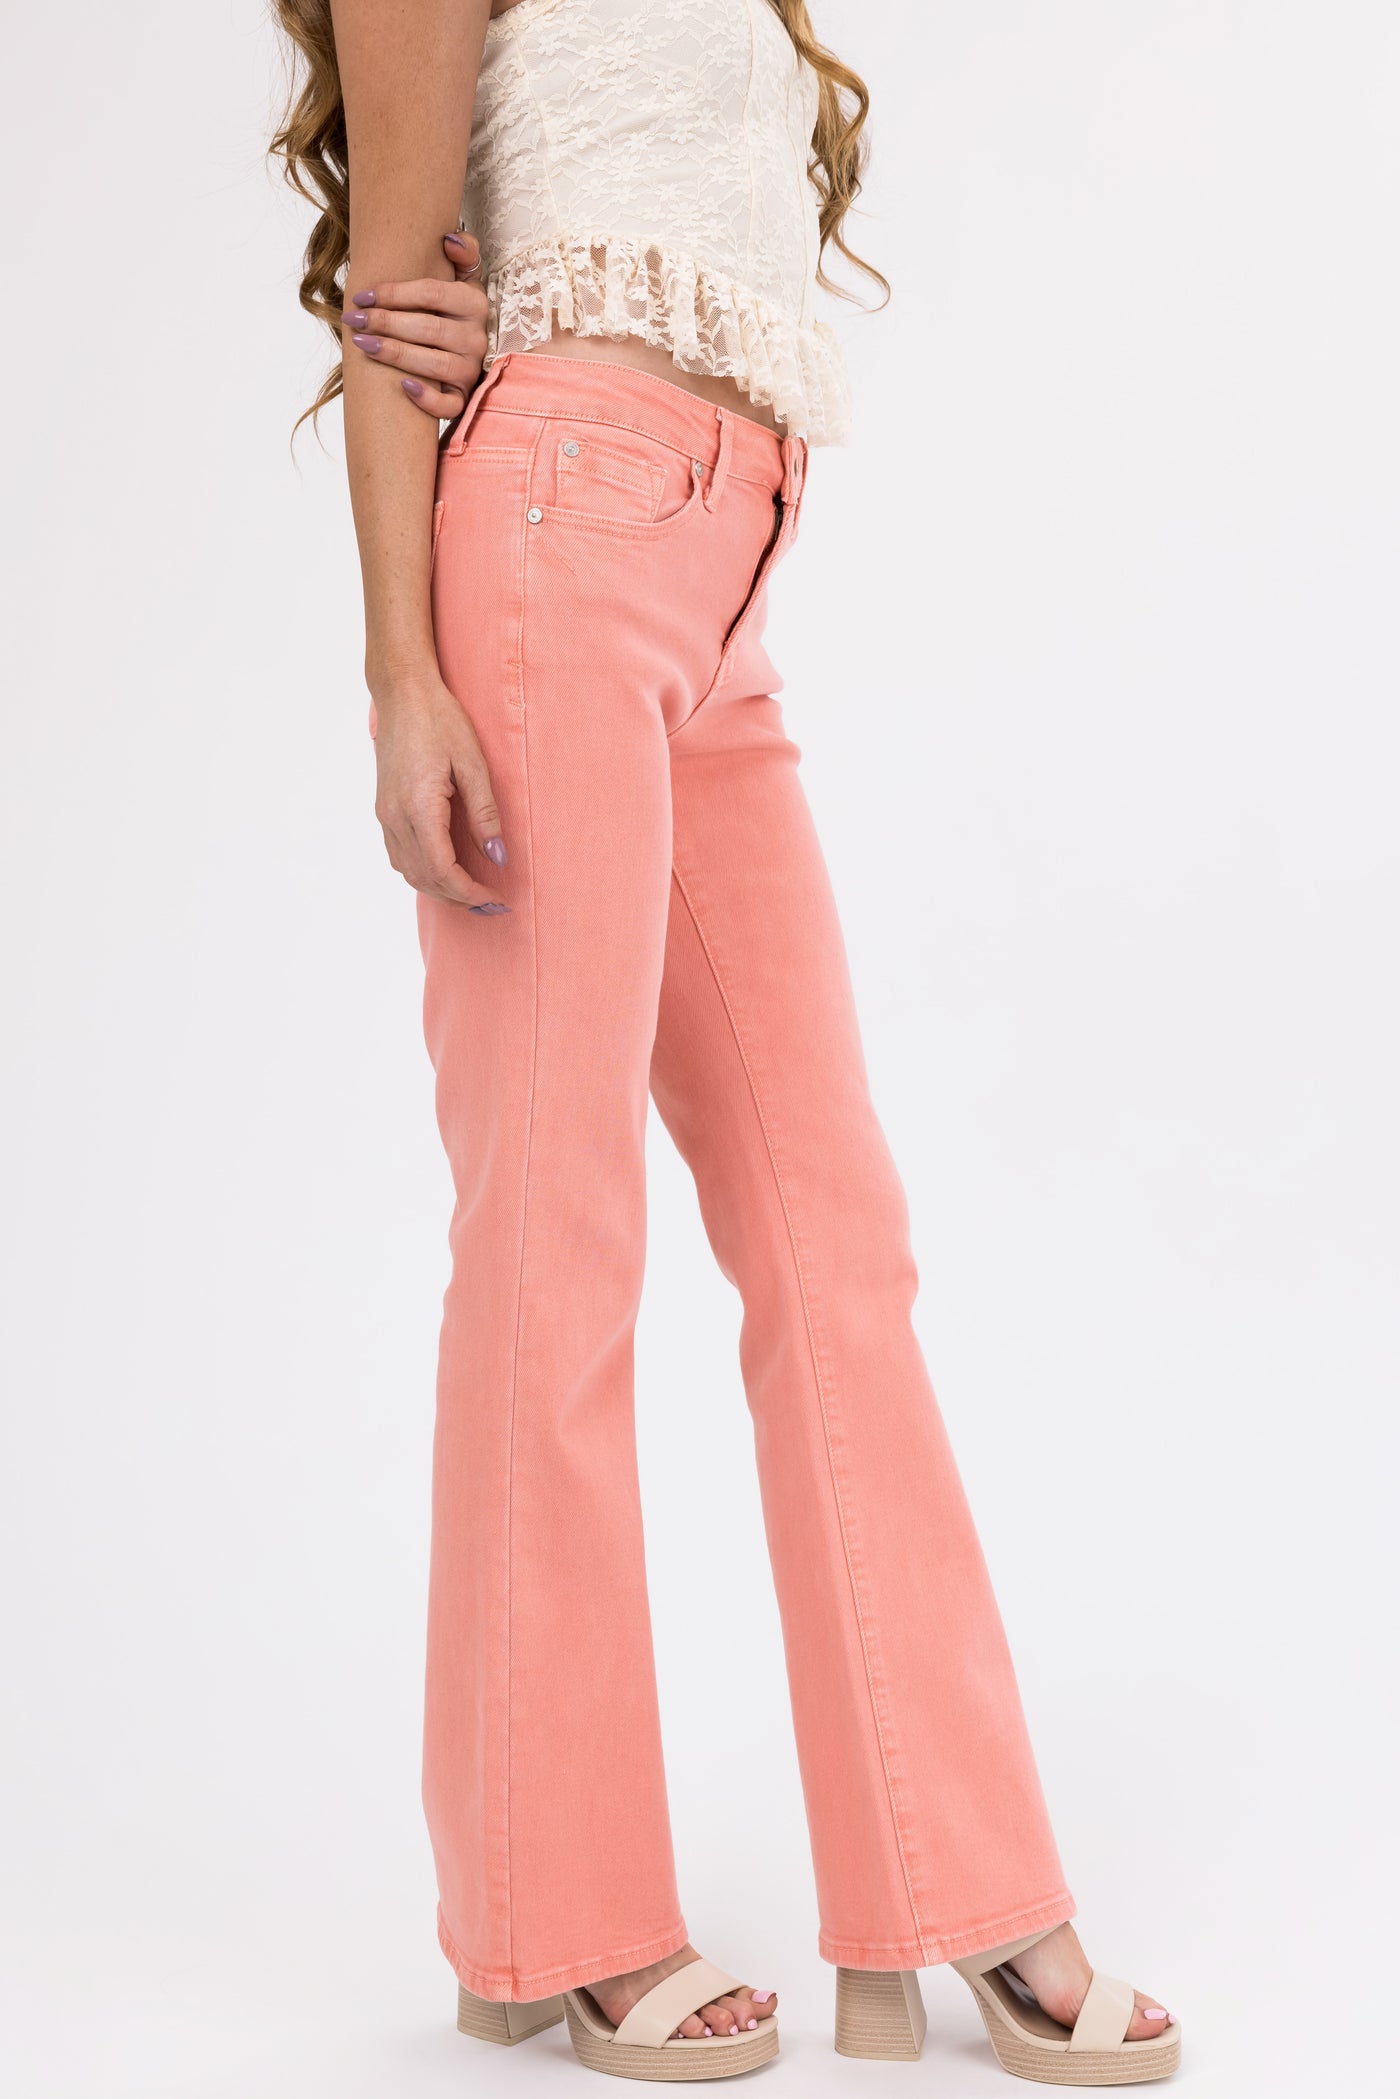 Special A Salmon Slim Bootcut Jeans